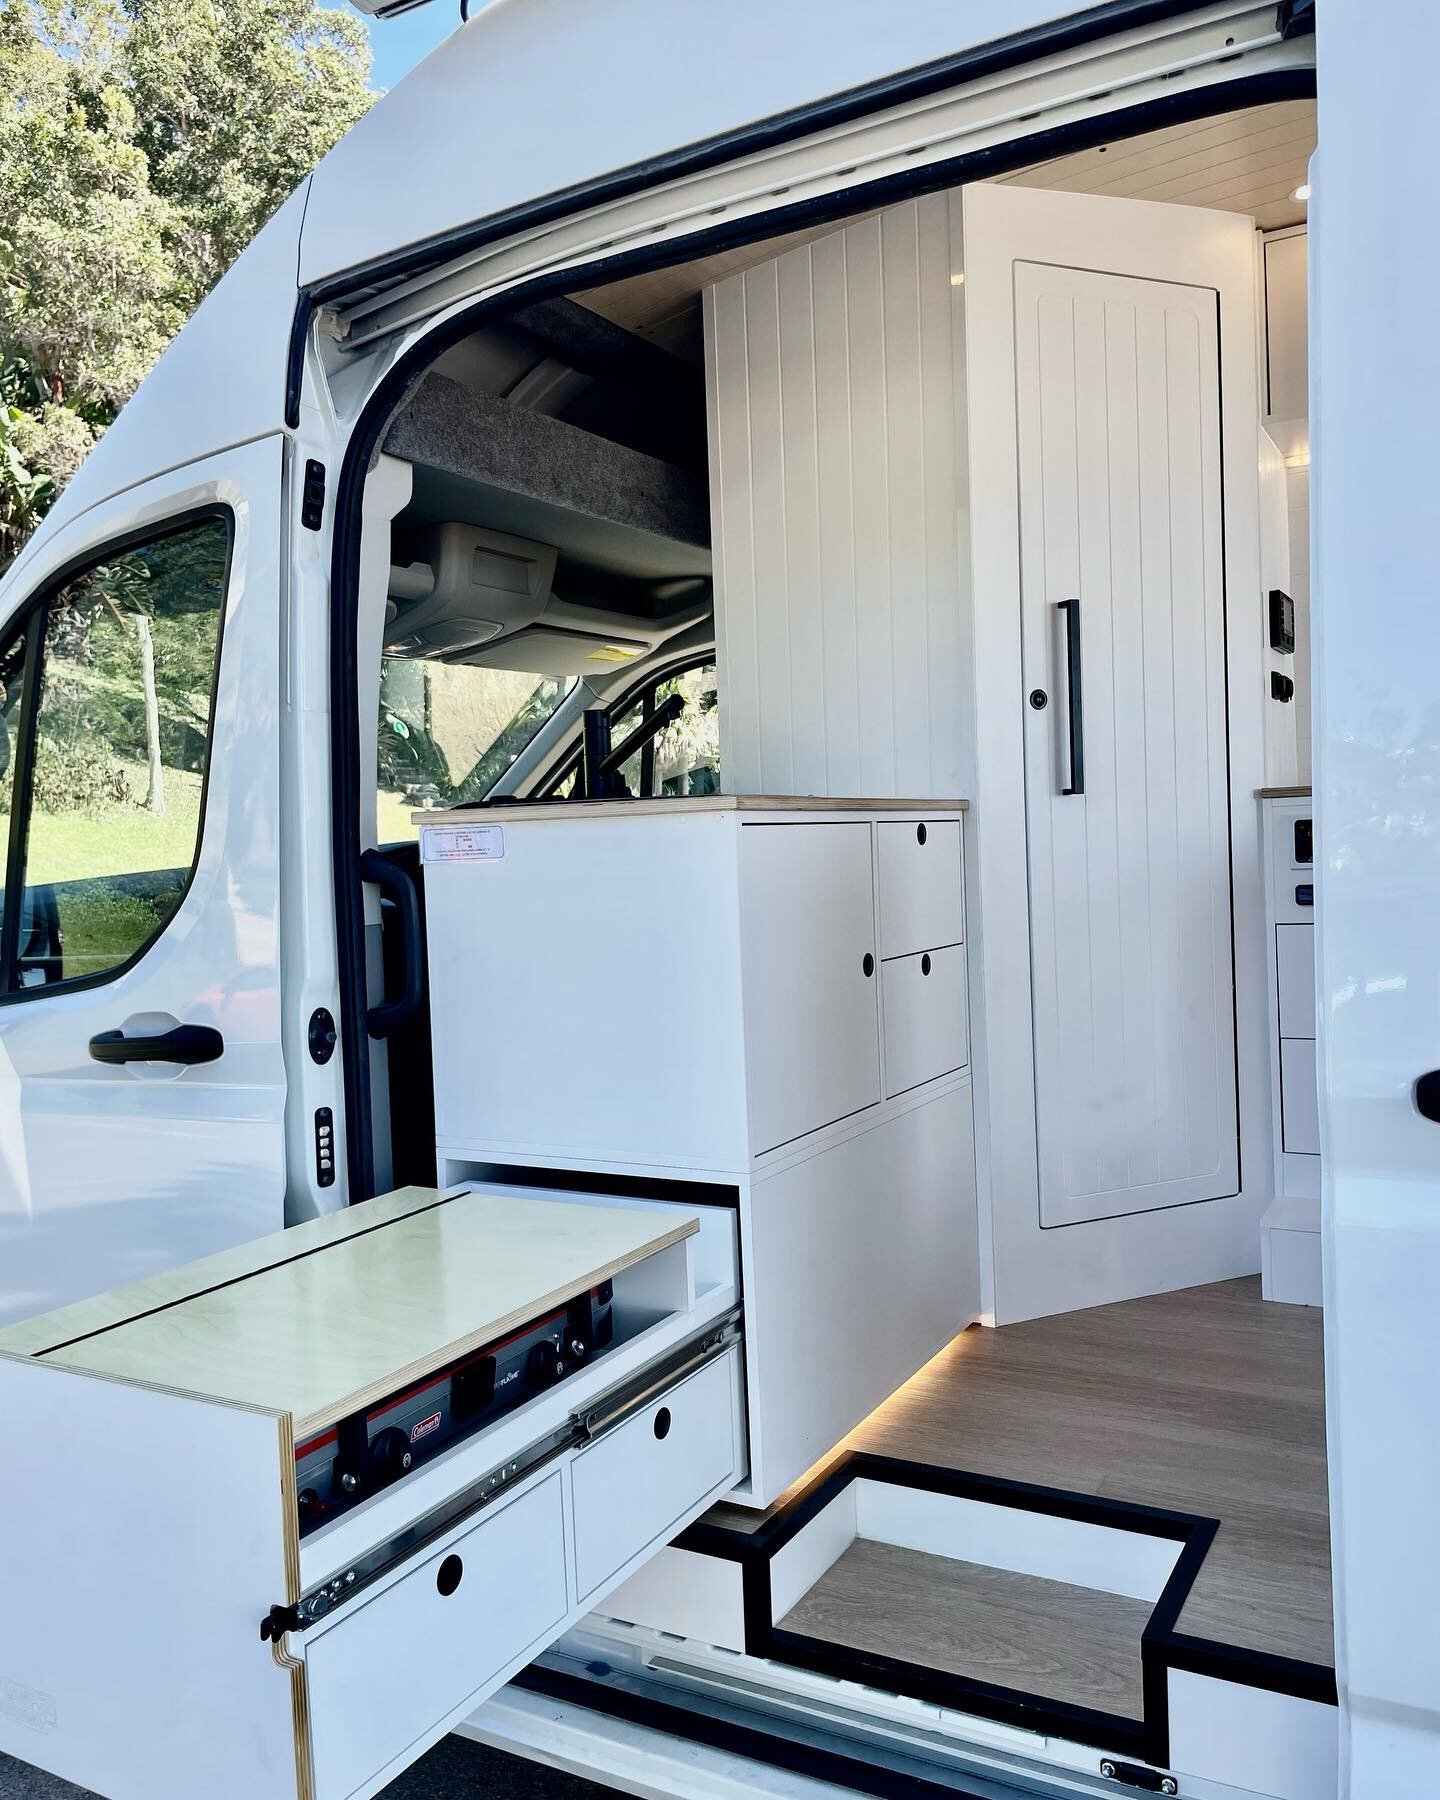 🚐 Are you looking to embrace the #VanLife with an extraordinary #camper #conversion that speaks to your wanderlust soul! Your search for the perfect camper ends here.

⏰ Due to unforeseen vehicle delays, space for 3 large sized conversions has opene